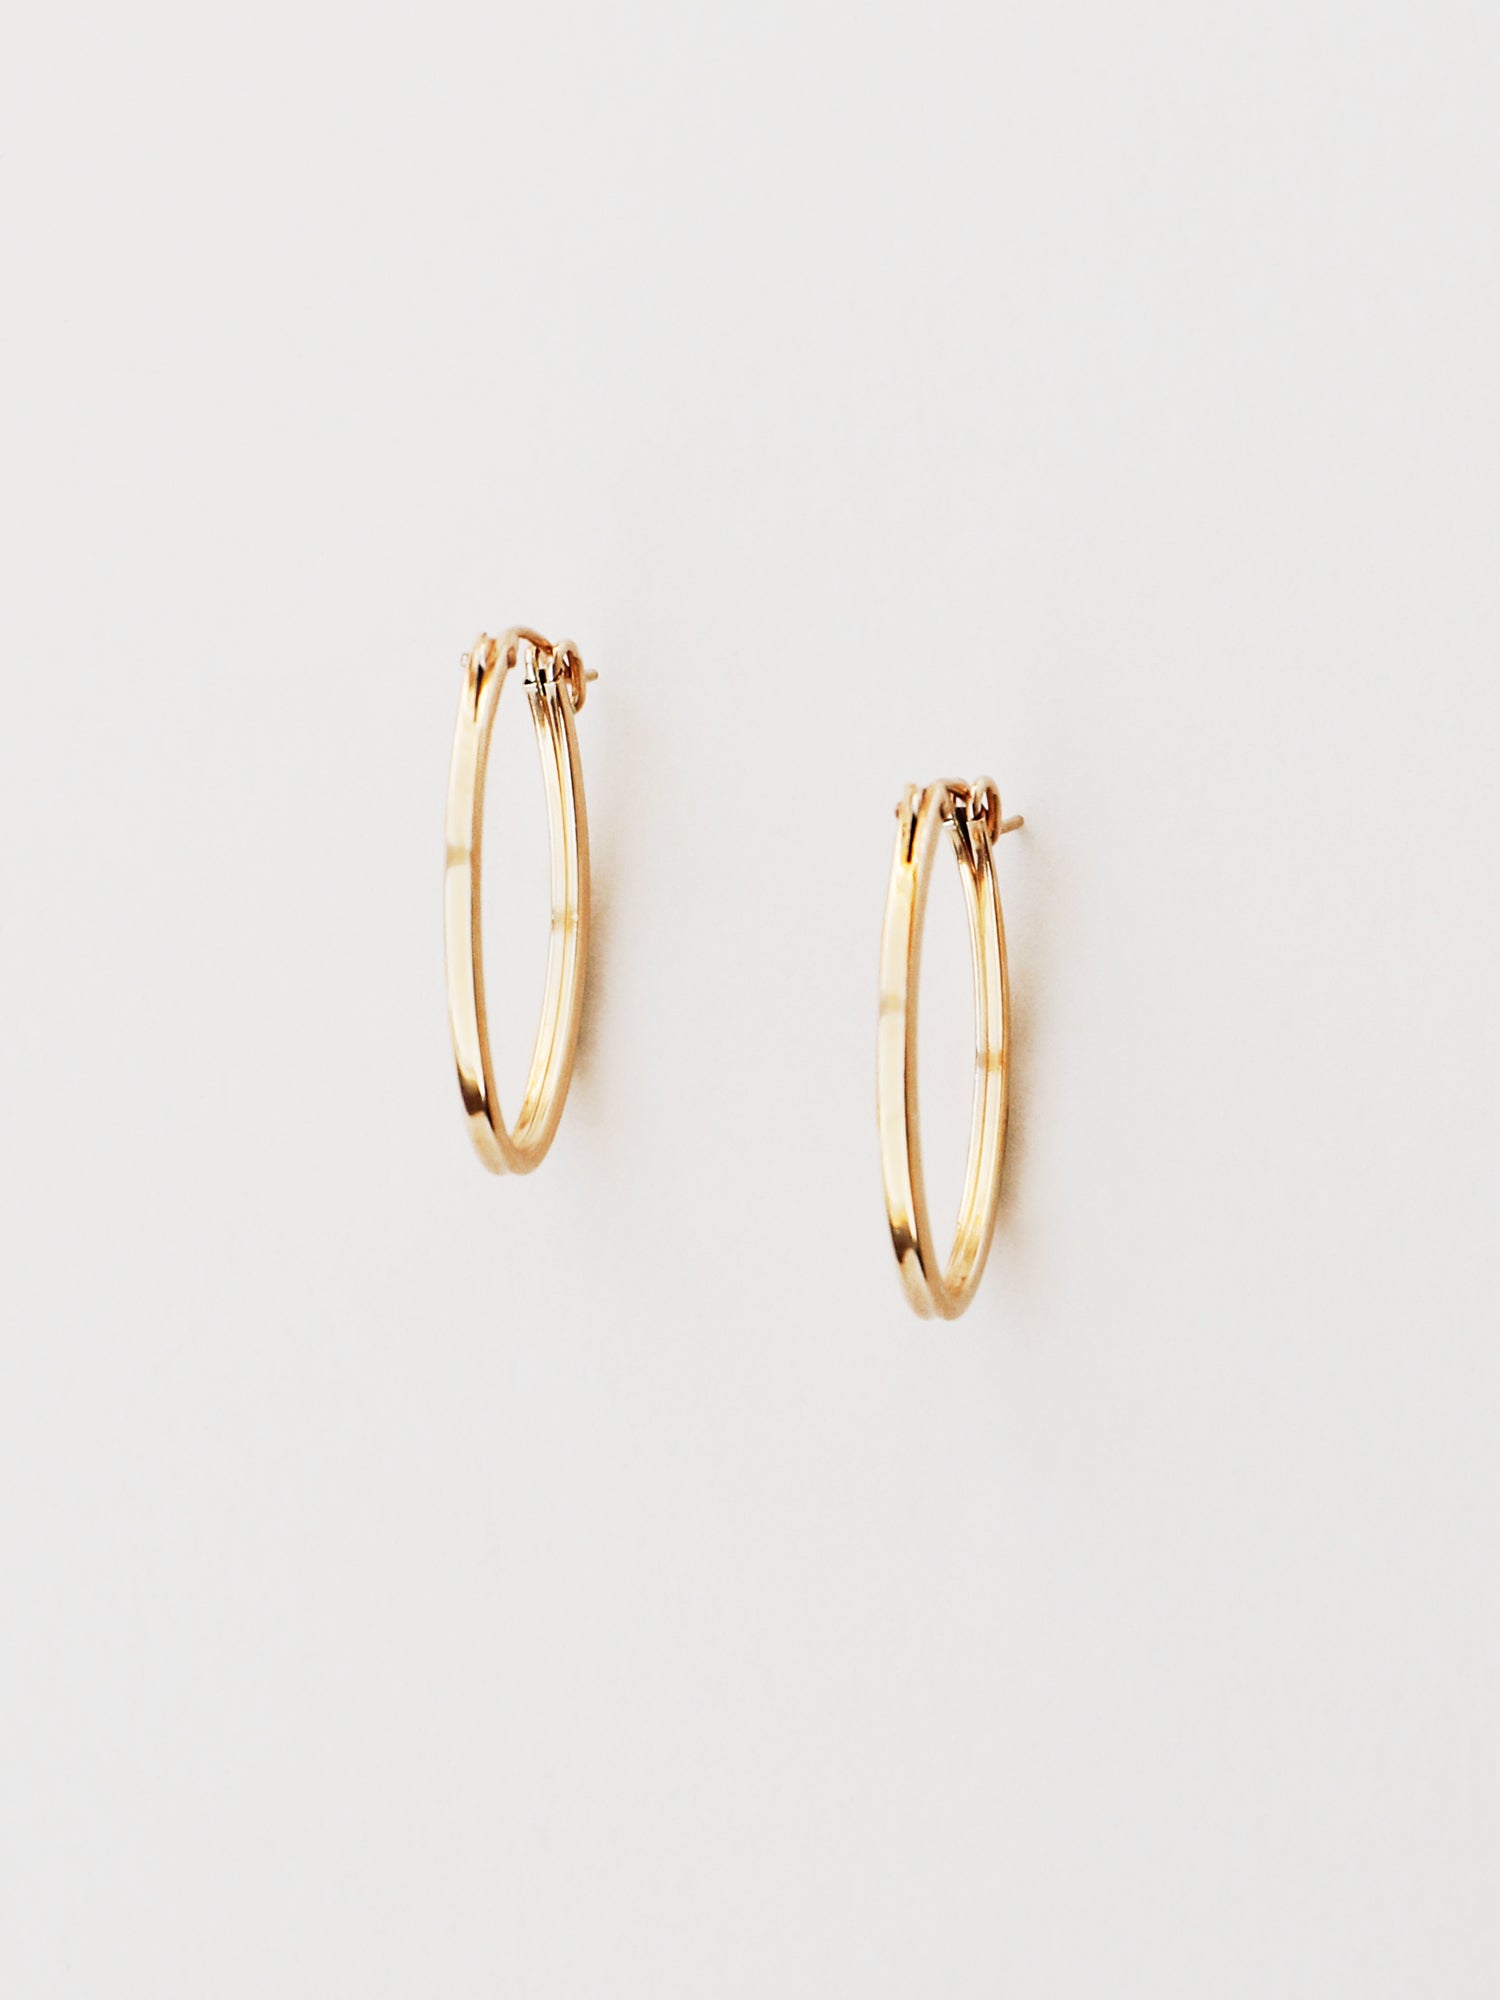 Gold-Filled Oval Hoops